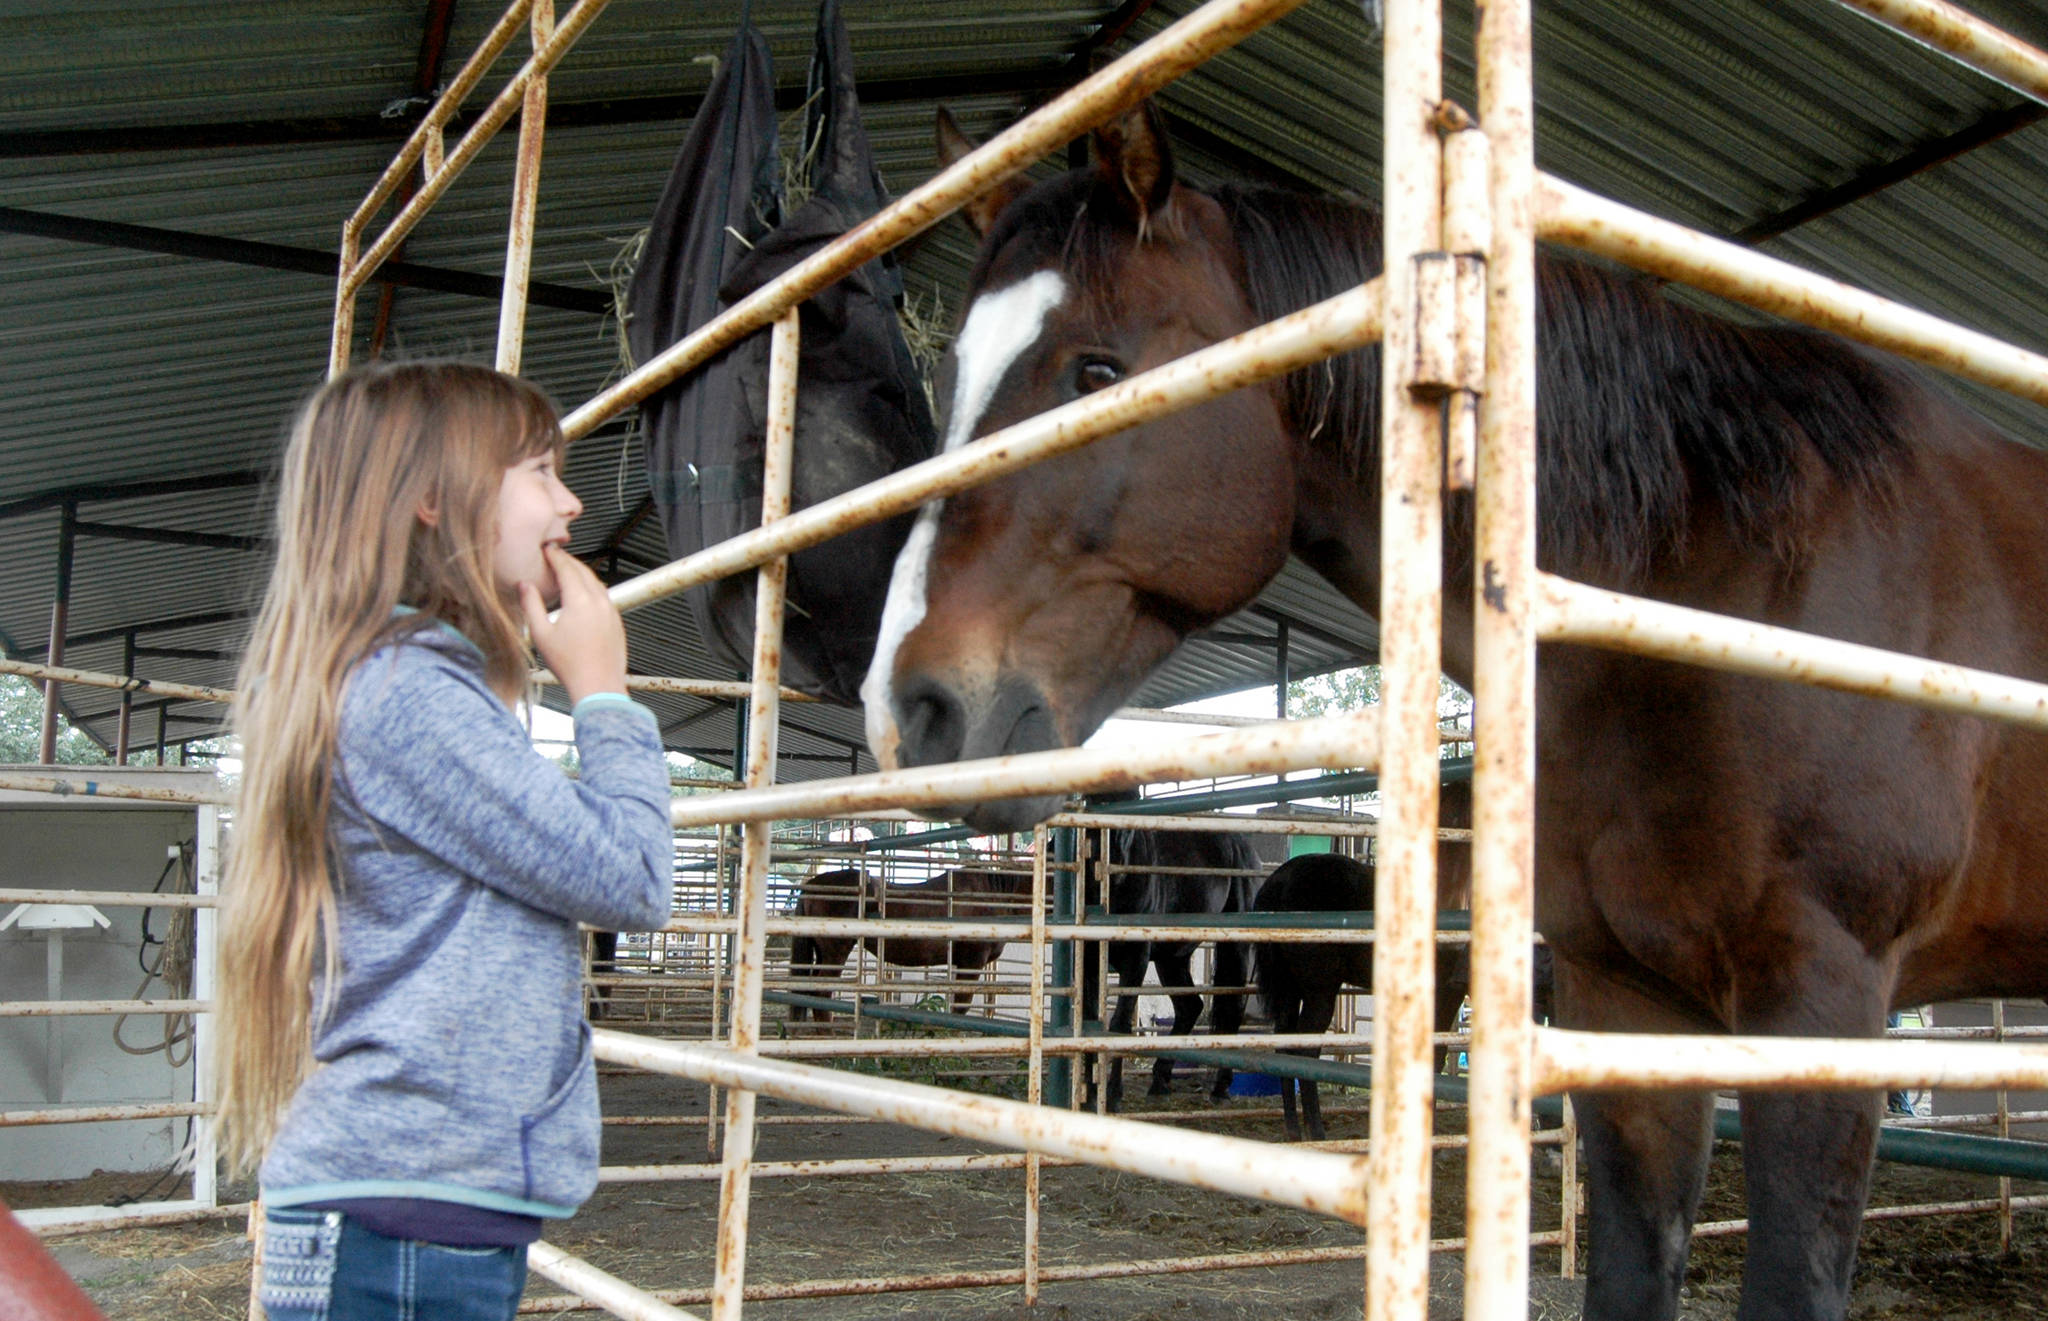 A young visitor admires a horse in the pens at the Kenai Peninsula Fair on Aug. 18, 2018 in Ninilchik, Alaska. (Photo by Elizabeth Earl/Peninsula Clarion)